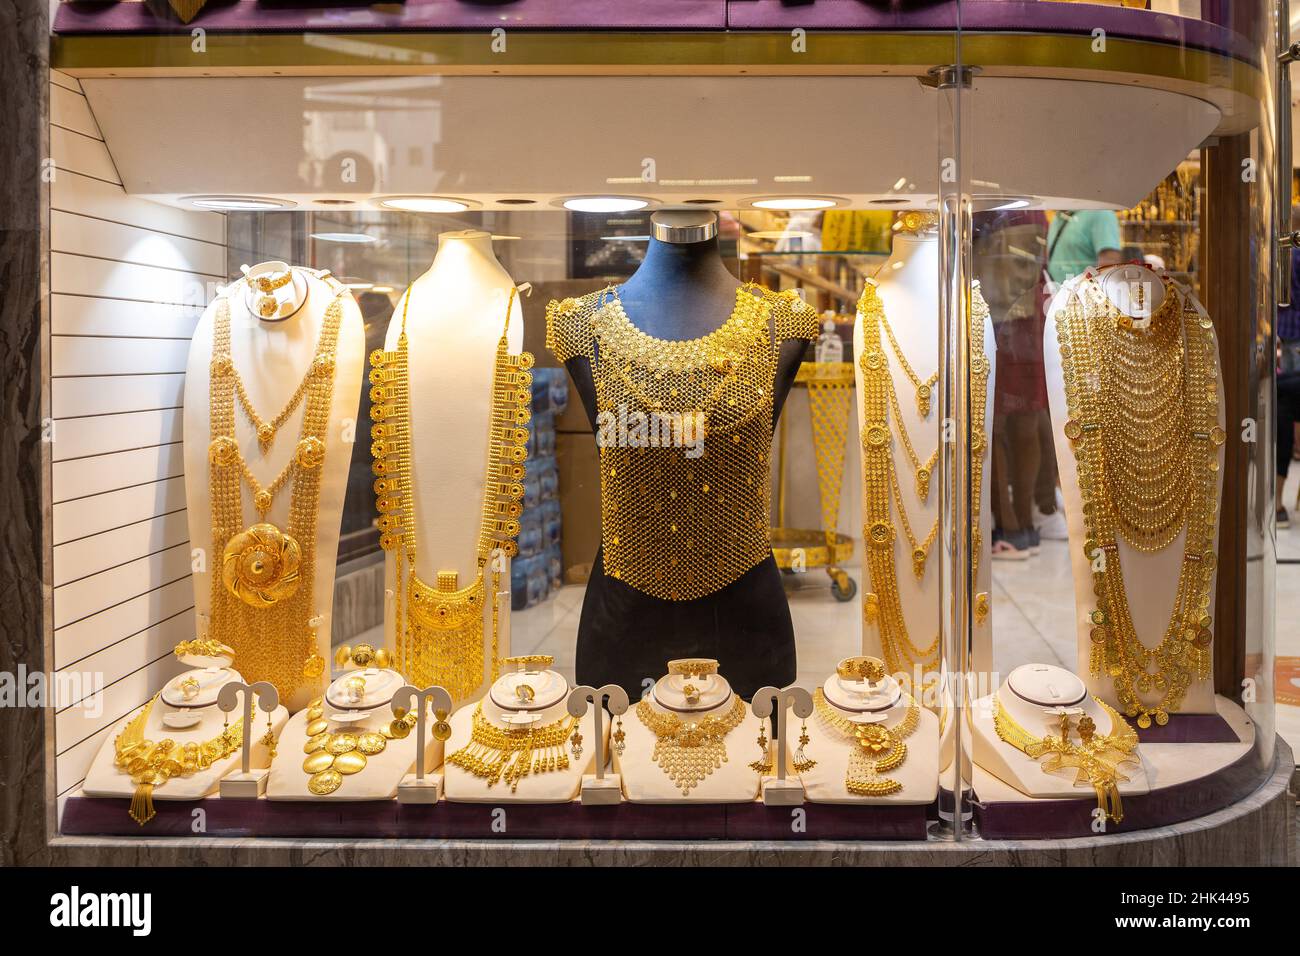 Dubai Gold Souk - golden jewelry - massive golden necklaces, armors, rings and hats displayed in a gold store. Stock Photo